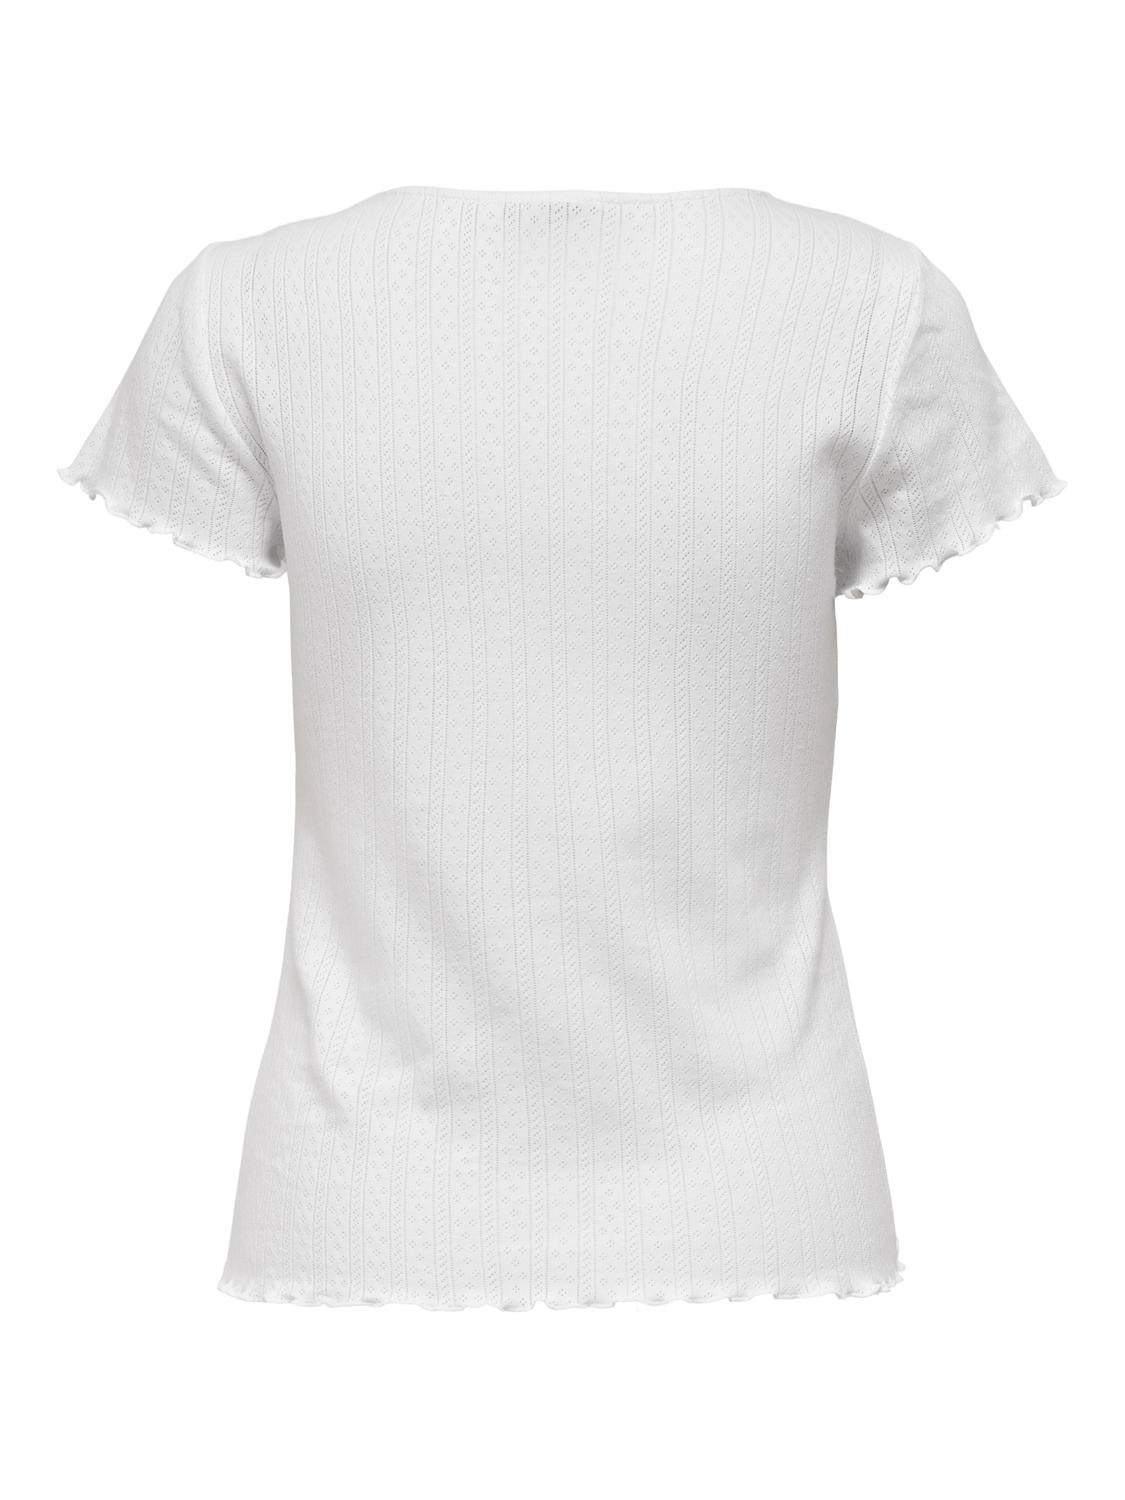 ONLY Tight Fit Round Neck Top -White - 15256154